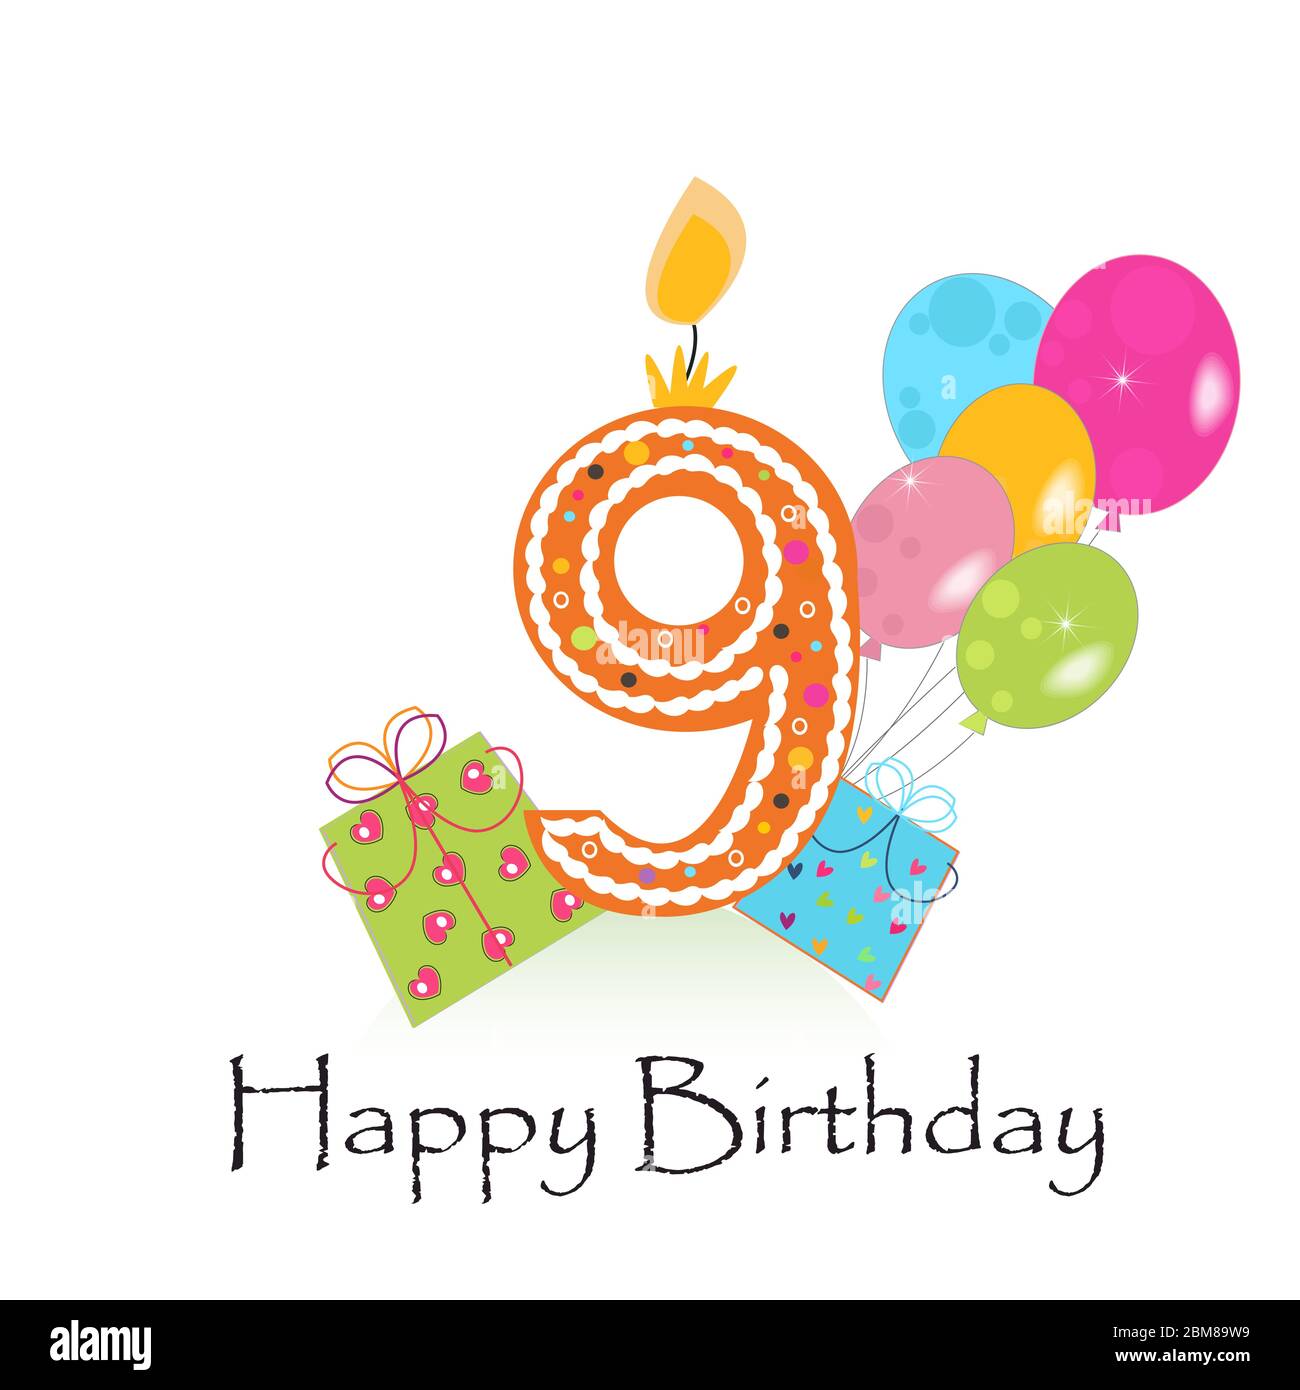 9th birthday Cut Out Stock Images & Pictures - Alamy